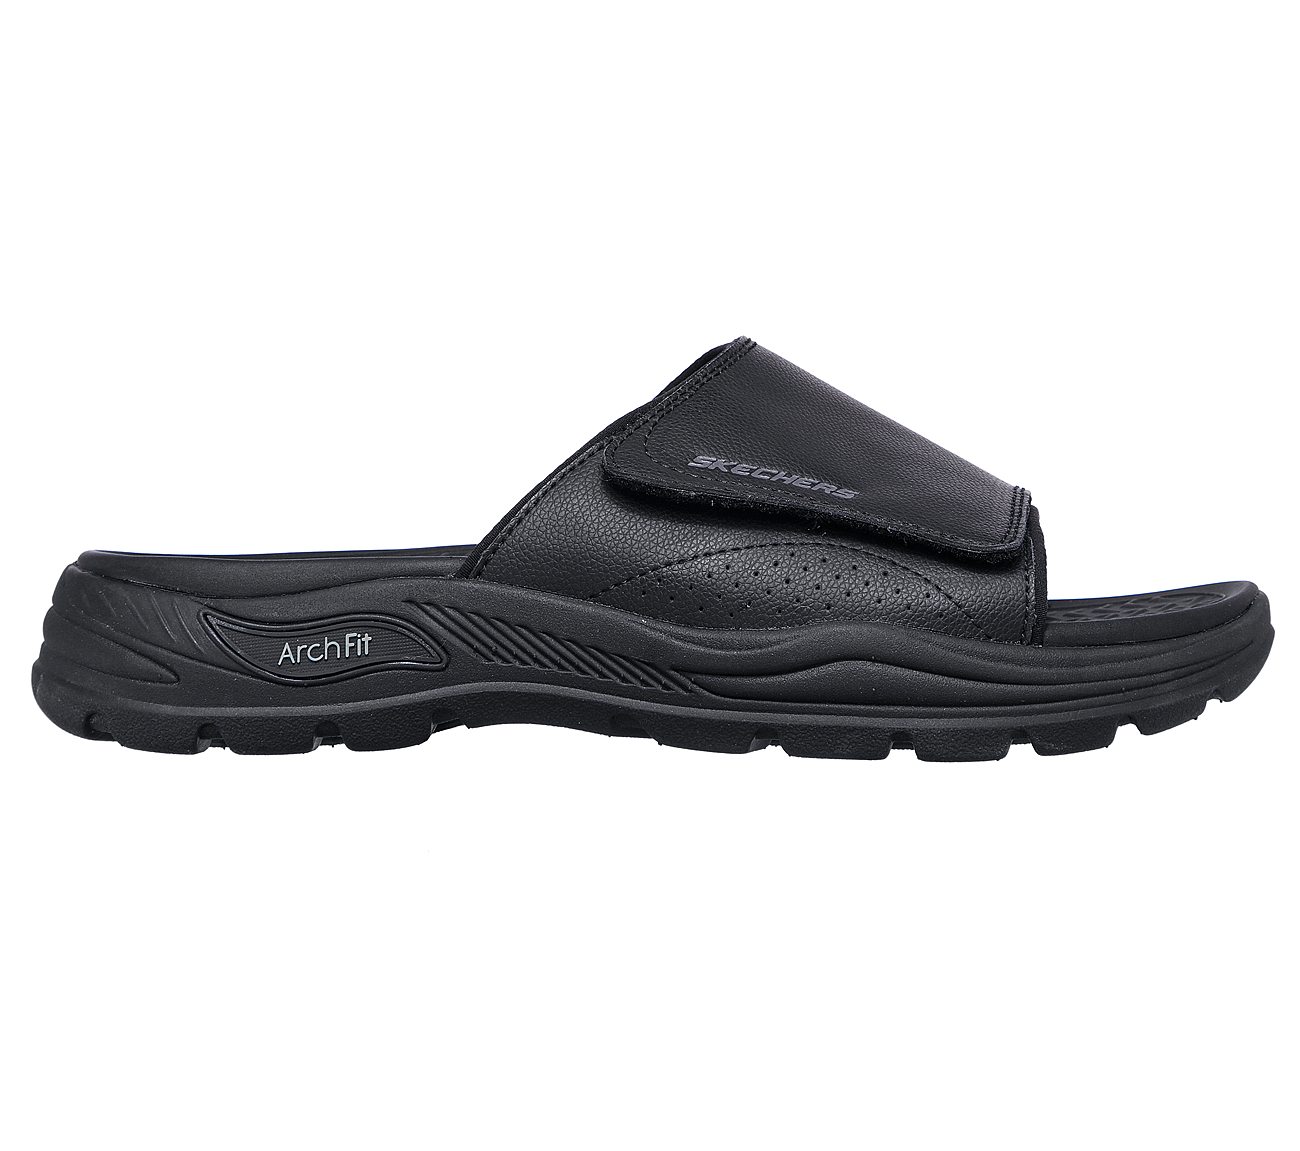 ARCH FIT MOTLEY SD - REVELO, BBBBLACK Footwear Right View